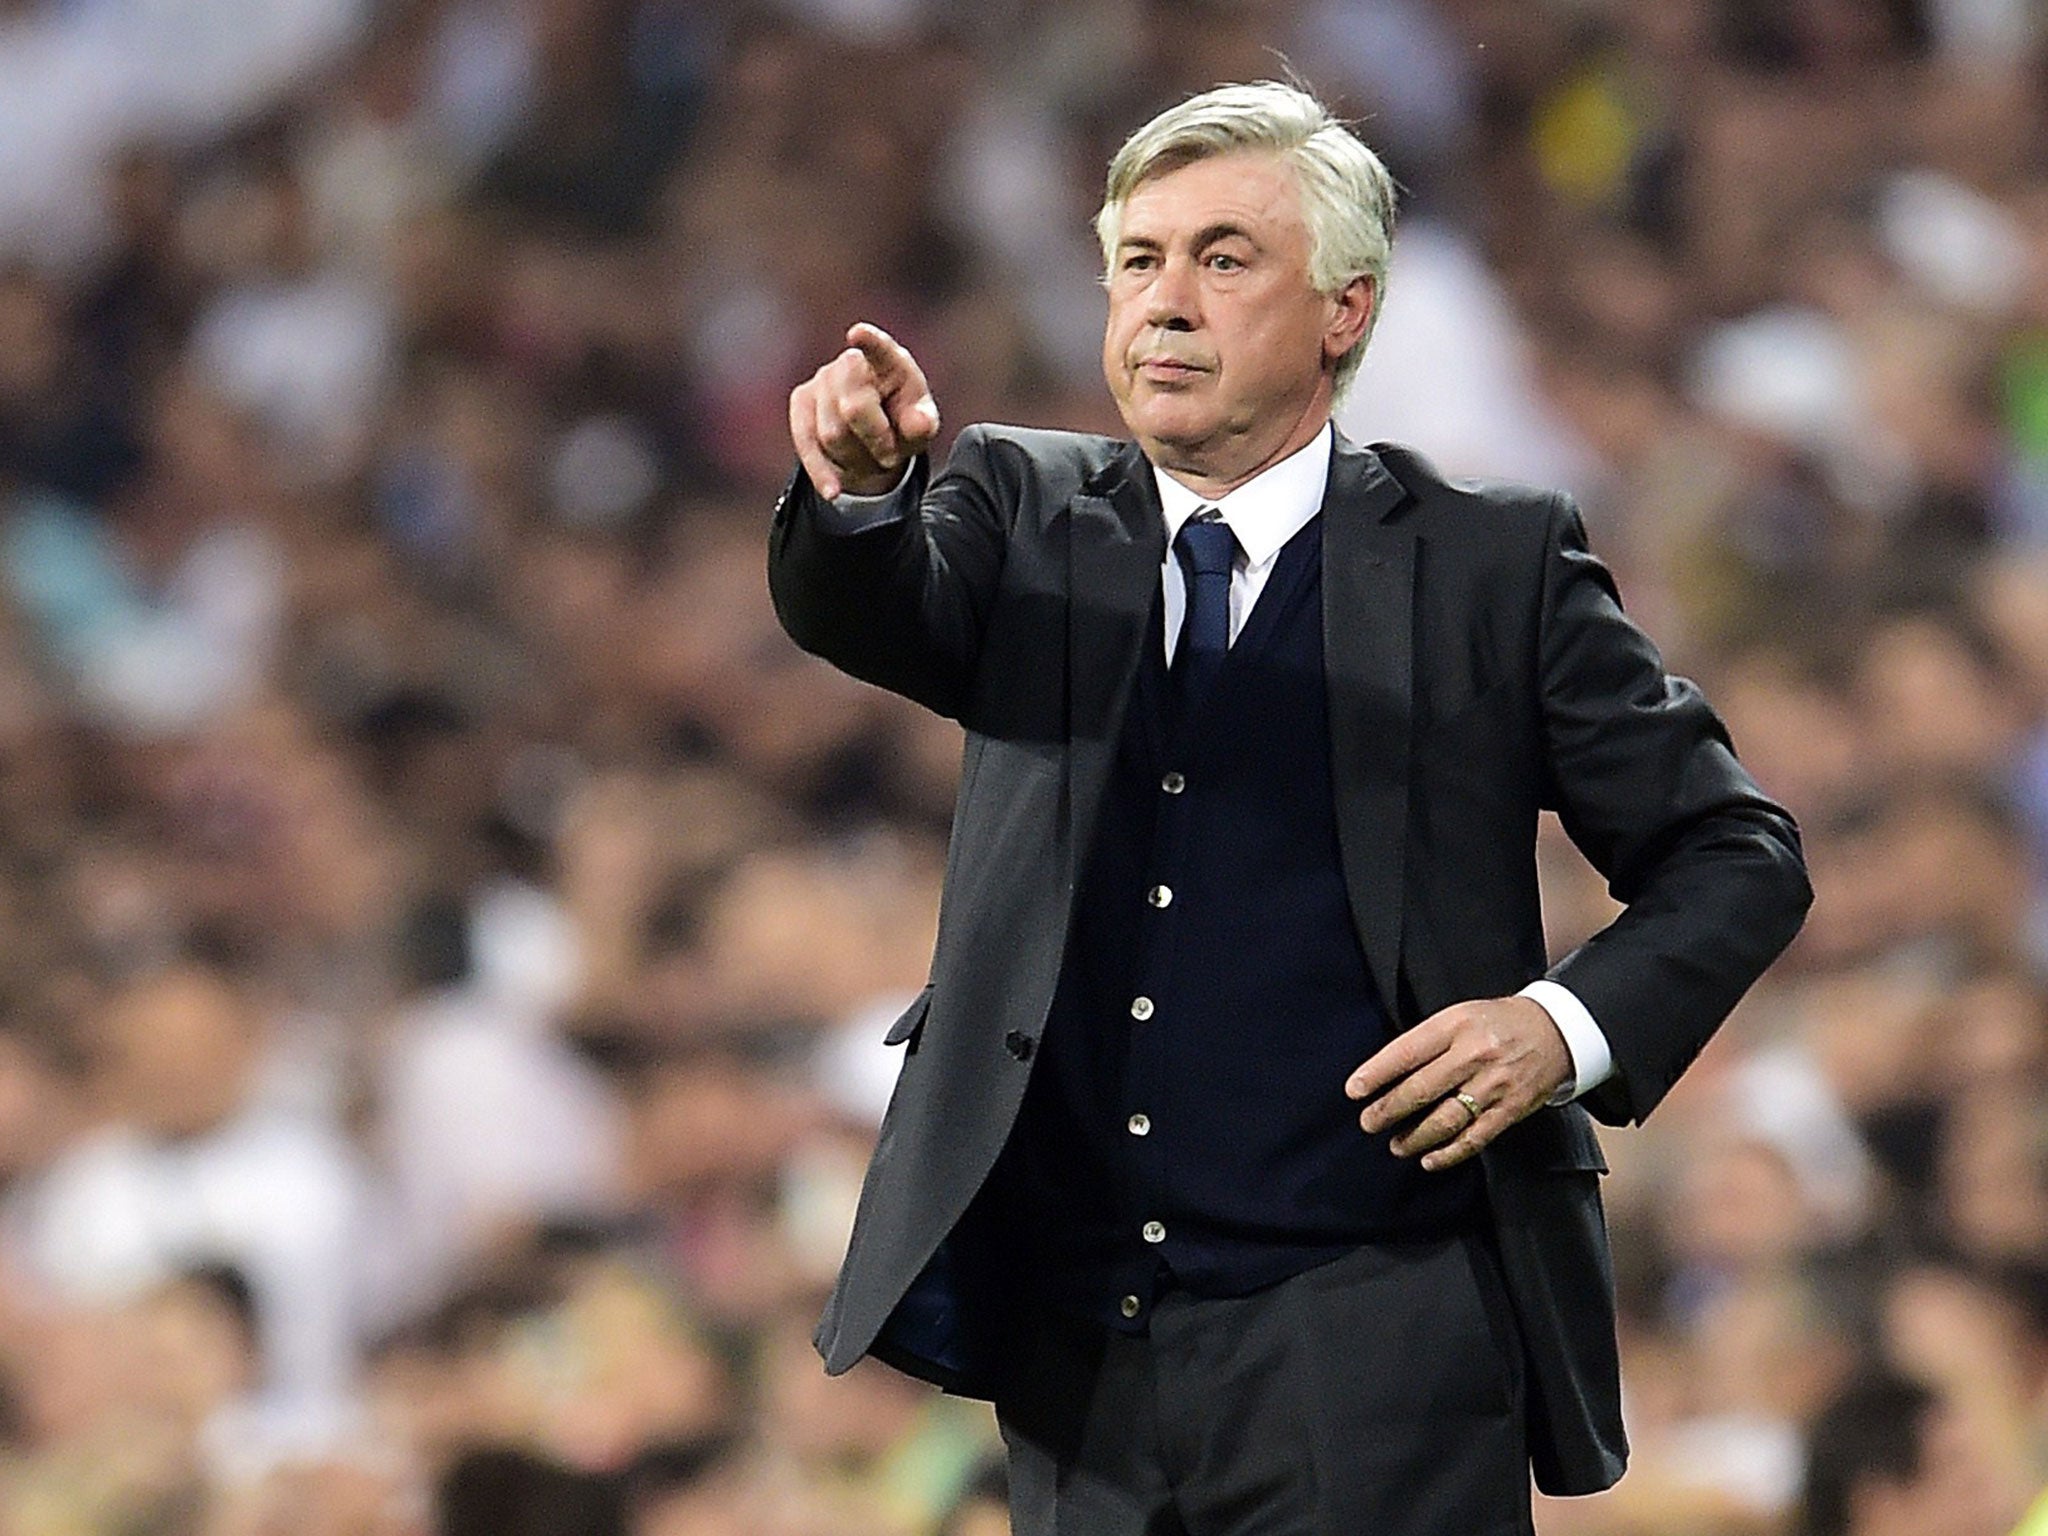 Real Madrid Manager Carlo Ancelotti - 'The atmosphere around